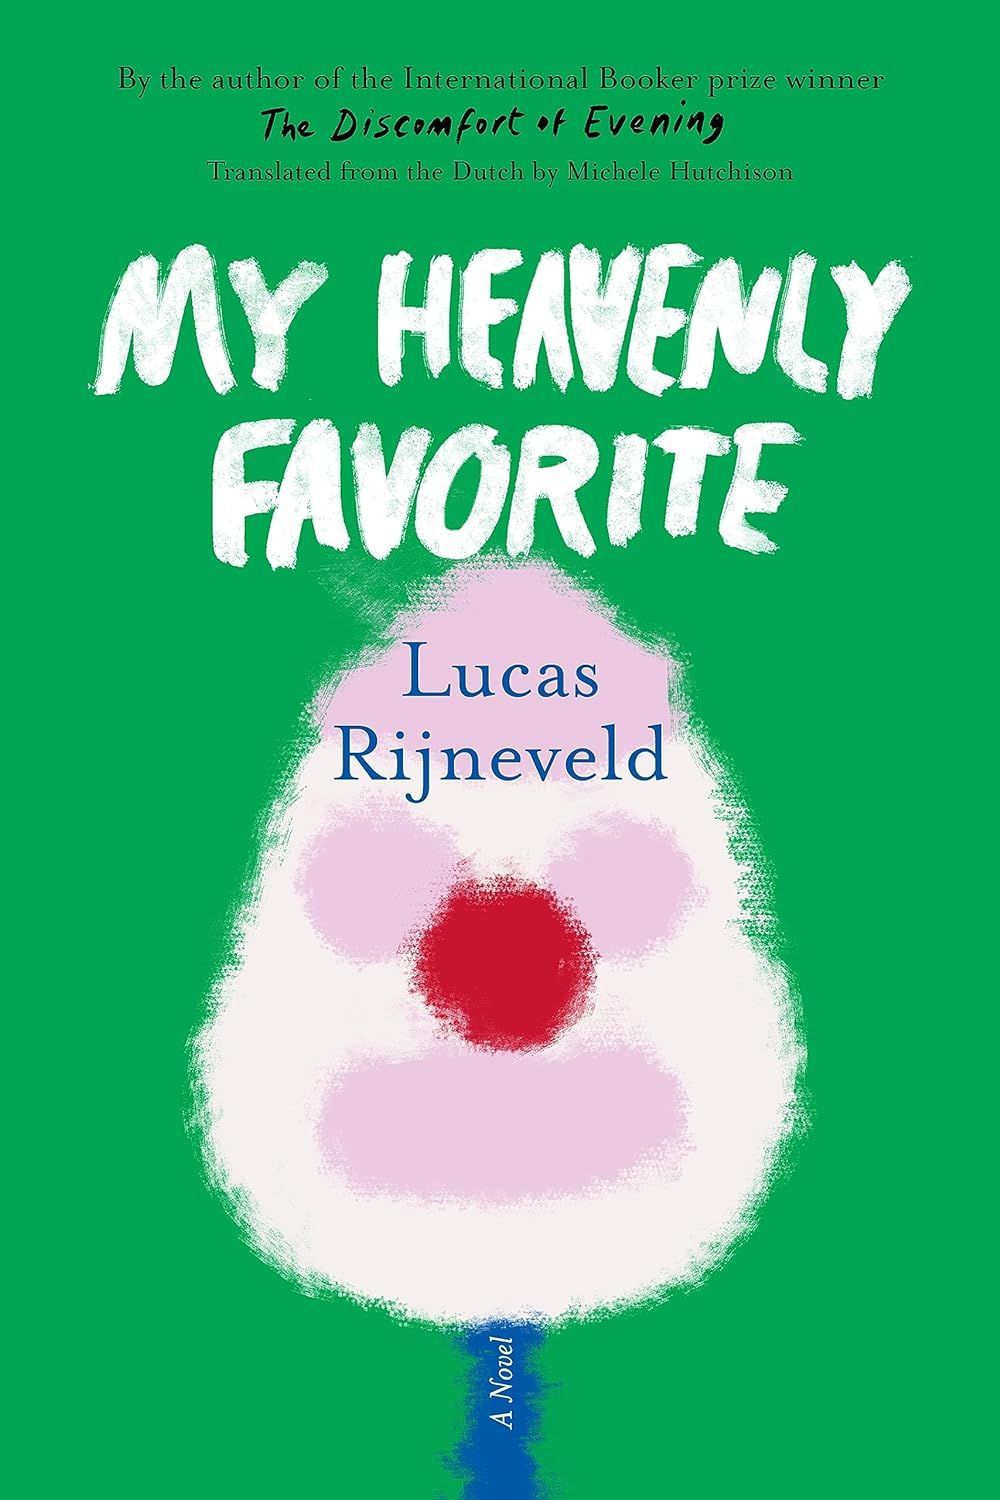 One Long, Queasy Confession: On Lucas Rijneveld’s “My Heavenly Favorite”